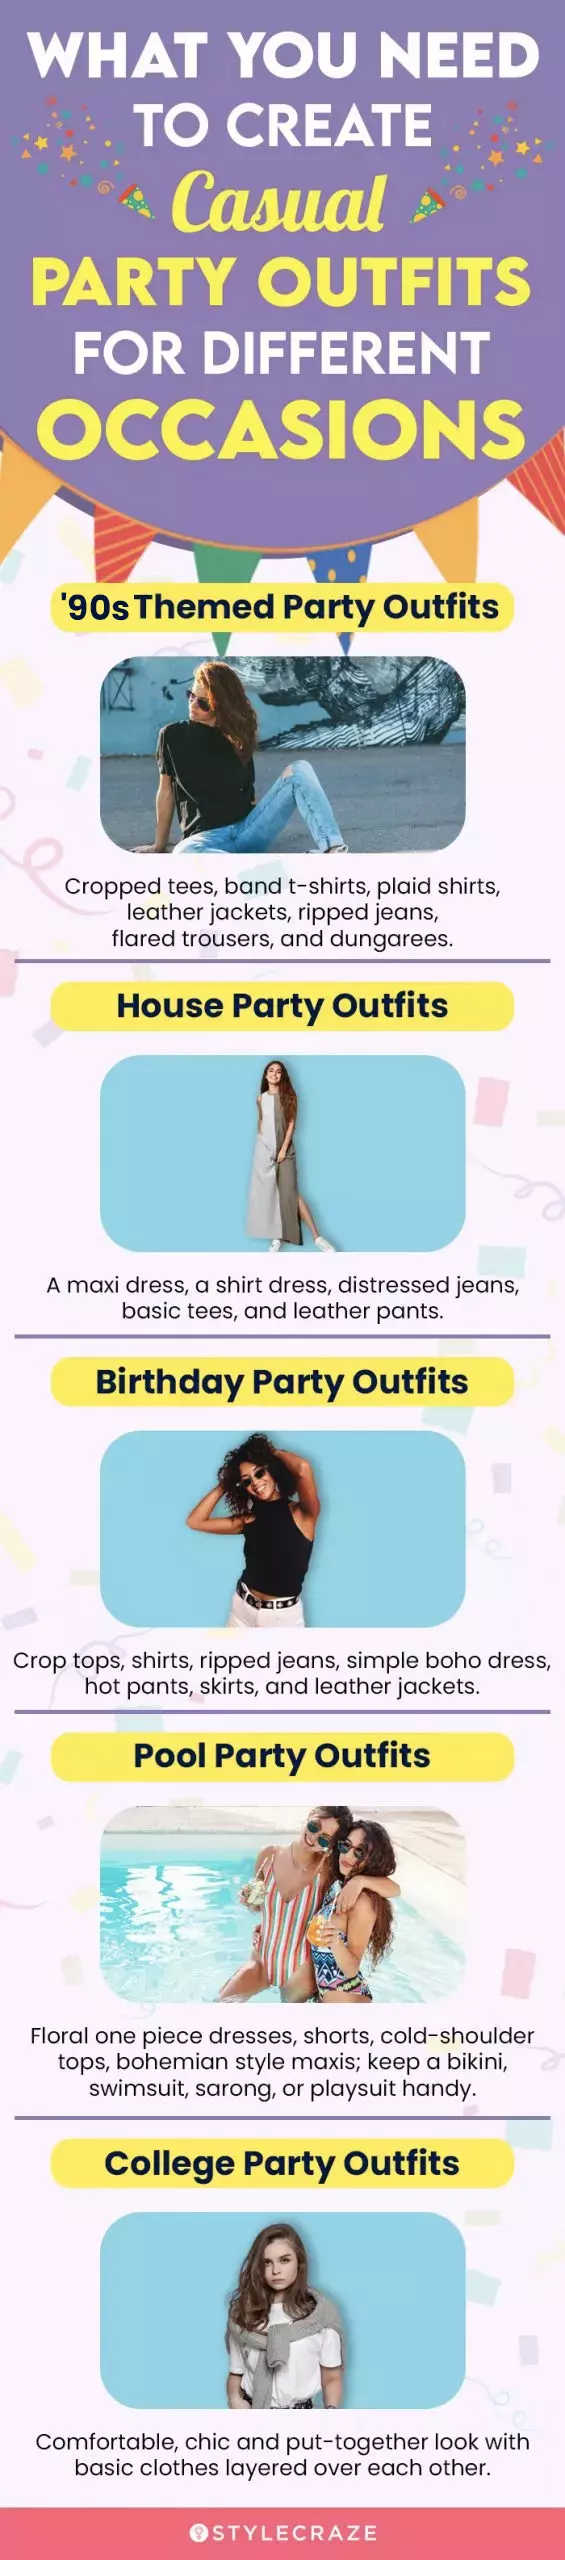 what you need to create casual party outfits for different occasions (infographic)